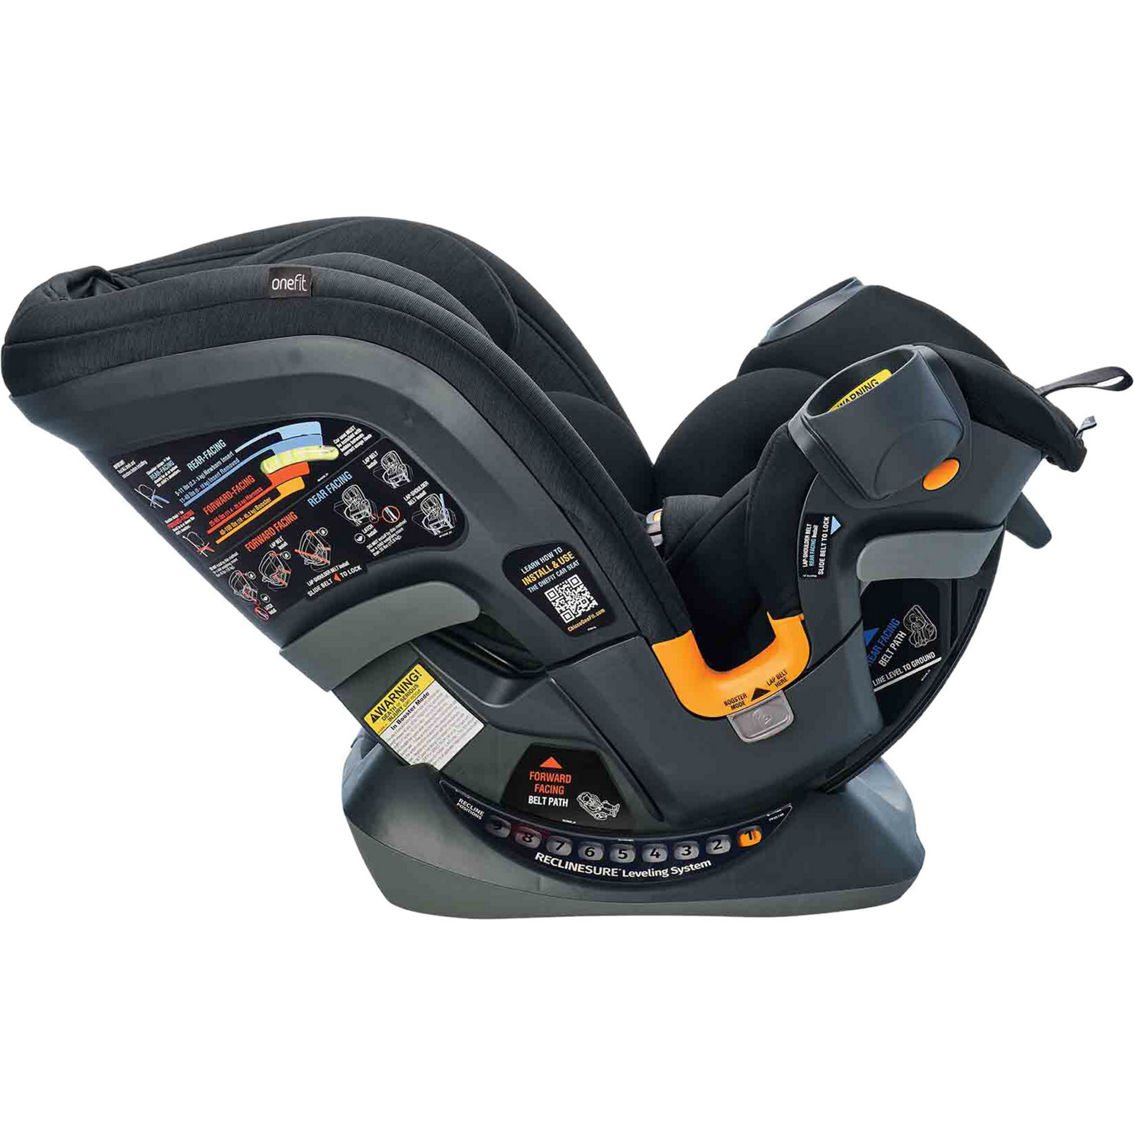 Chicco OneFit ClearTex All-in-One Car Seat - Image 7 of 7